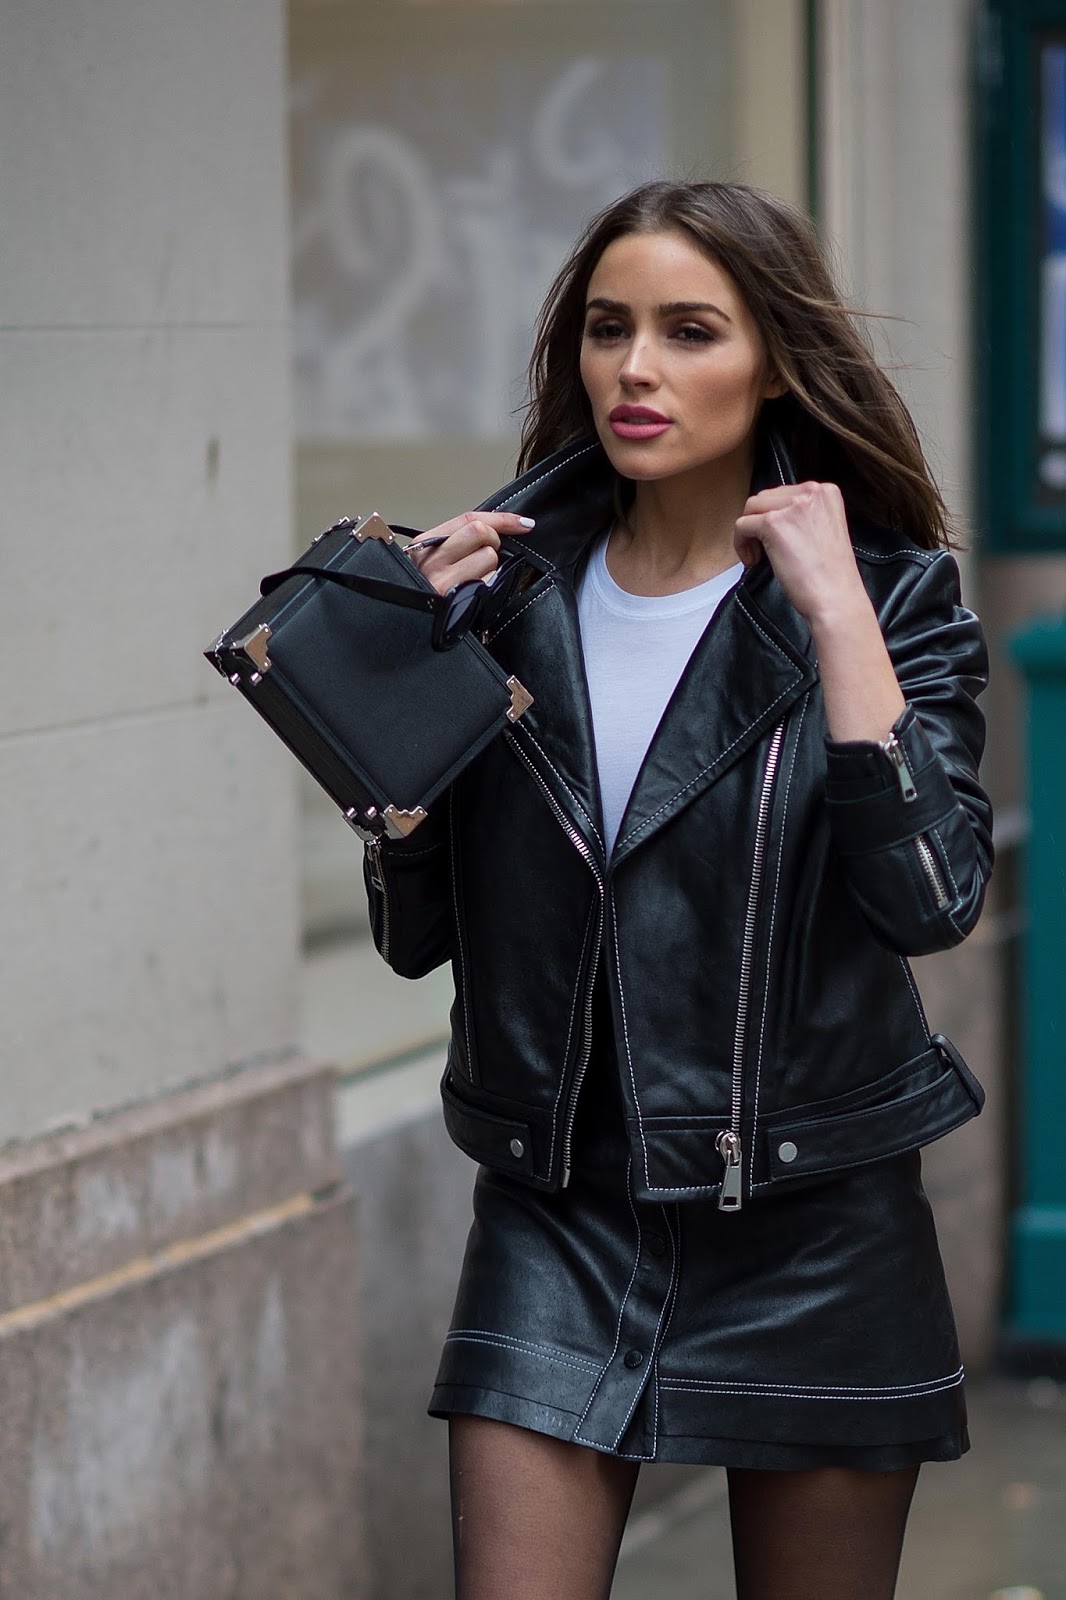 Lovely Ladies in Leather: Olivia Culpo in a leather suit